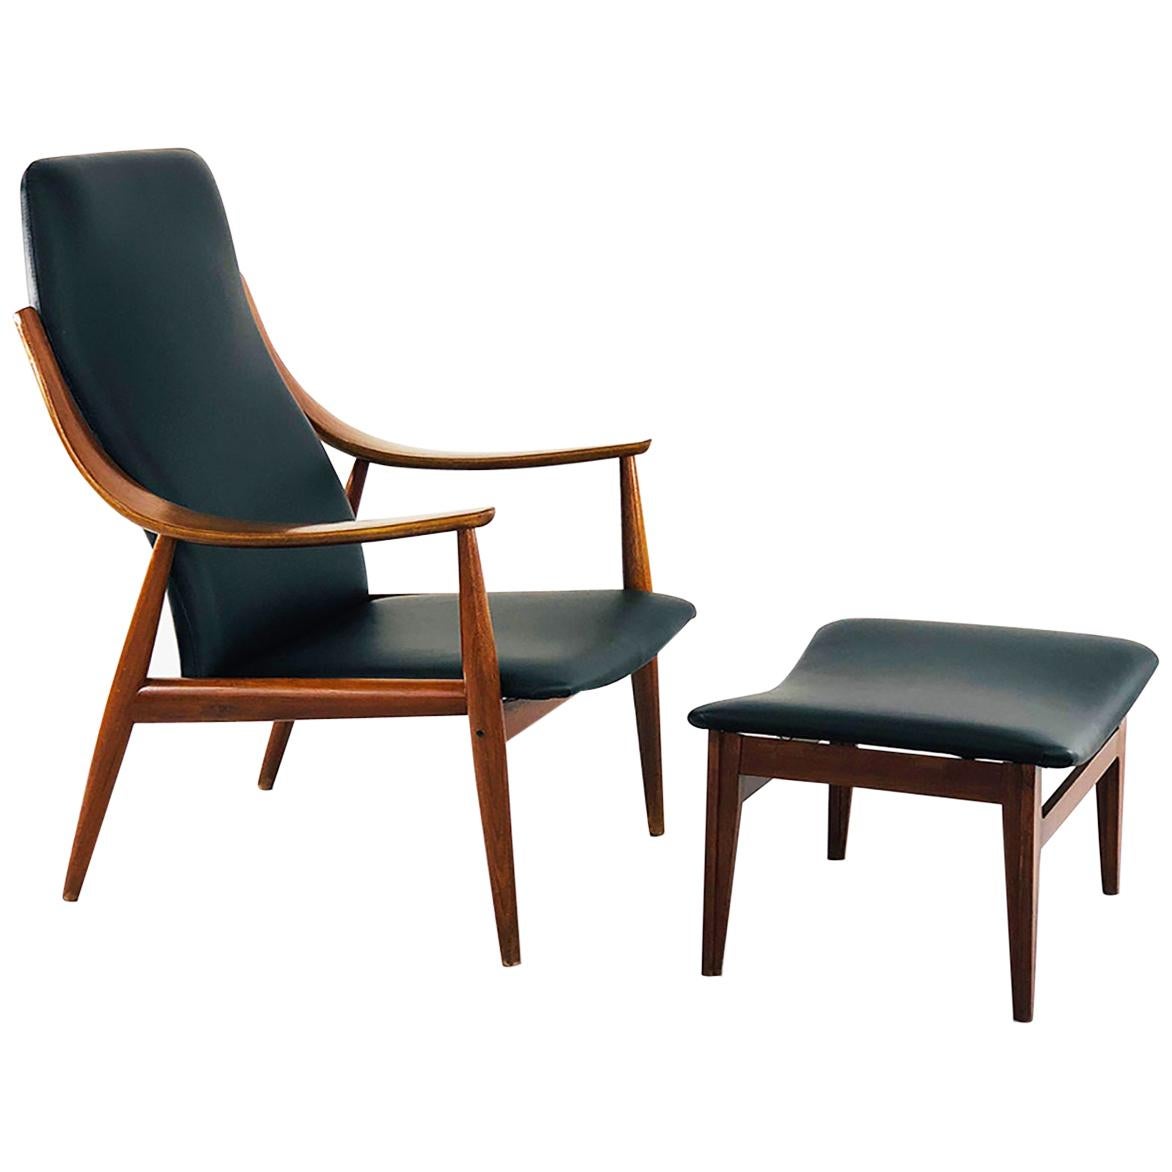 Ottoman and Lounge Chair by Peter Hvidt for France & Son